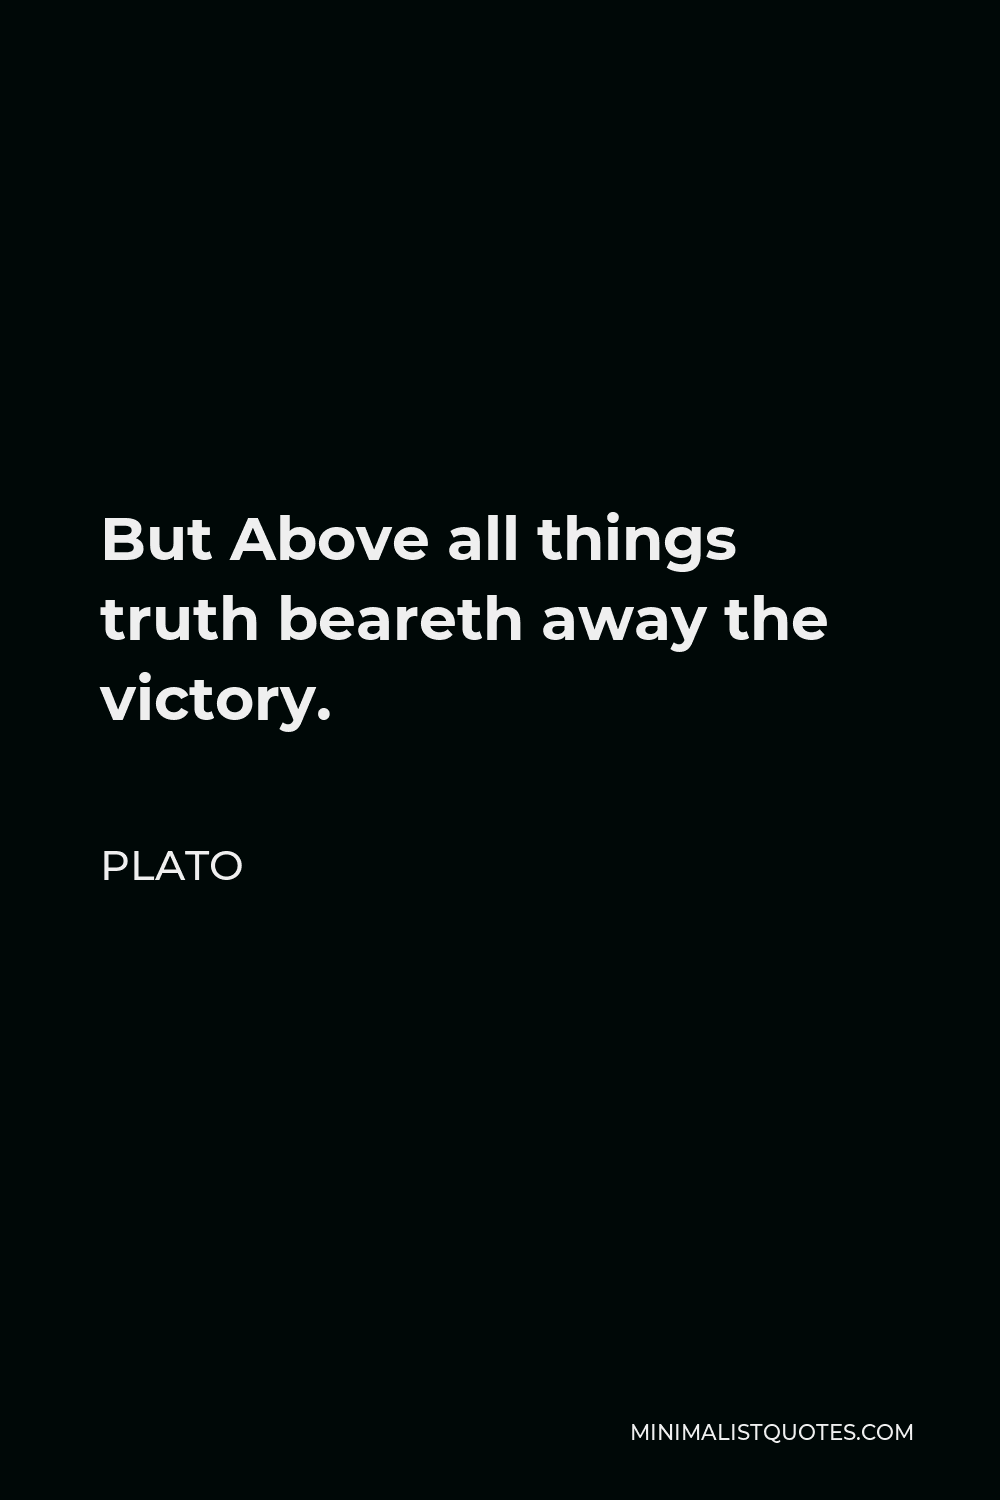 Plato Quote - But Above all things truth beareth away the victory.